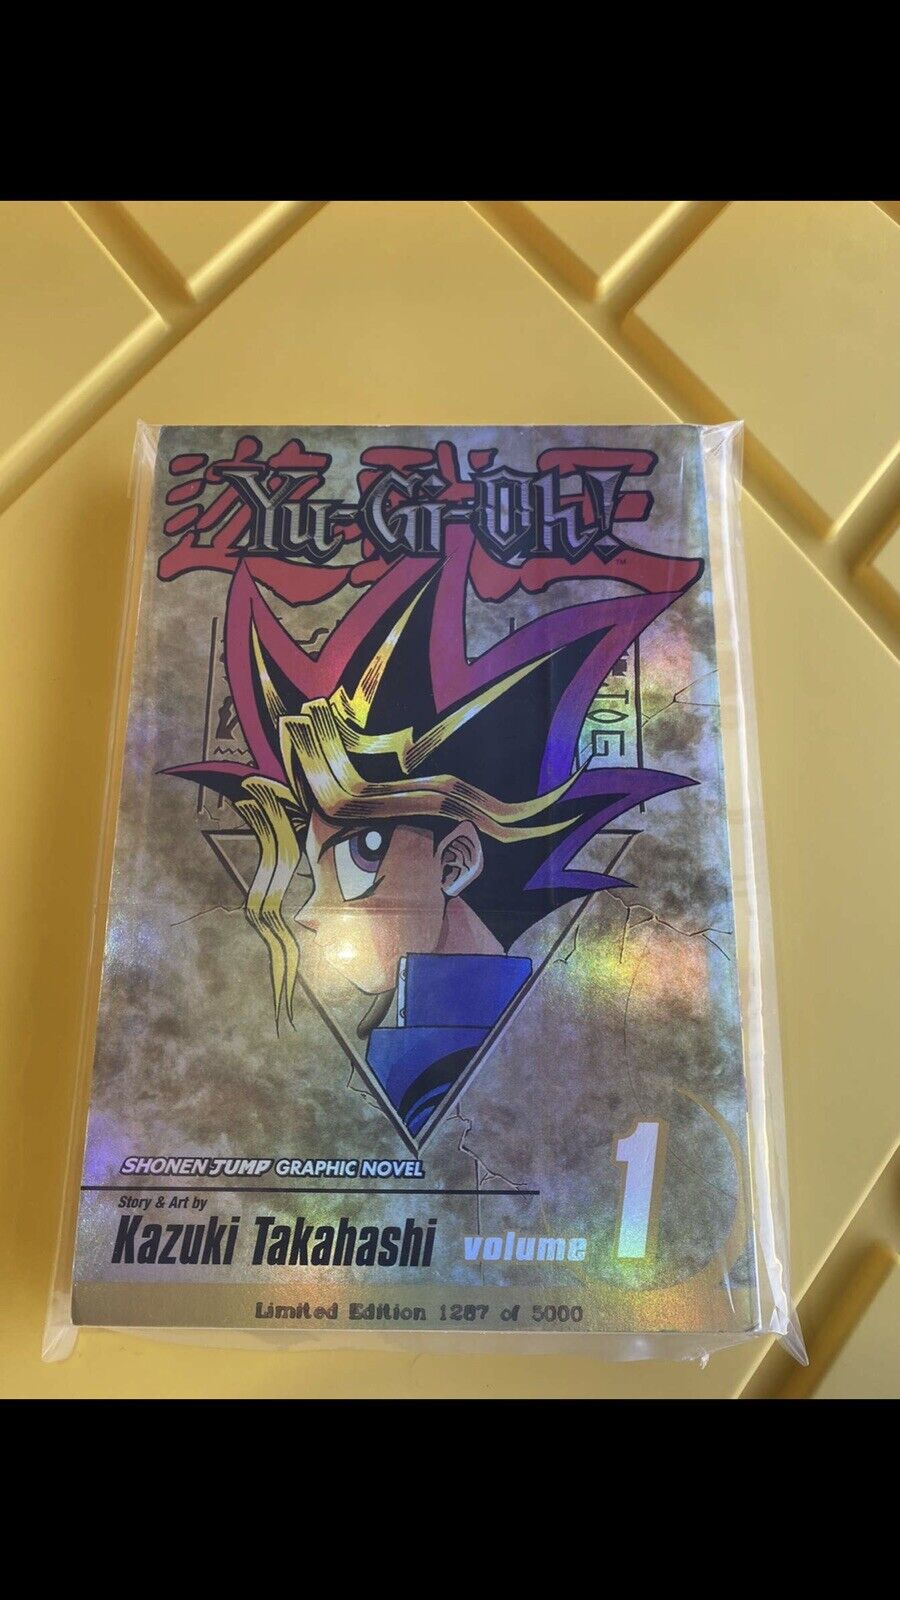 Yu Gi Oh Volume 1 - Limited Edition of 5000 - holographic NM